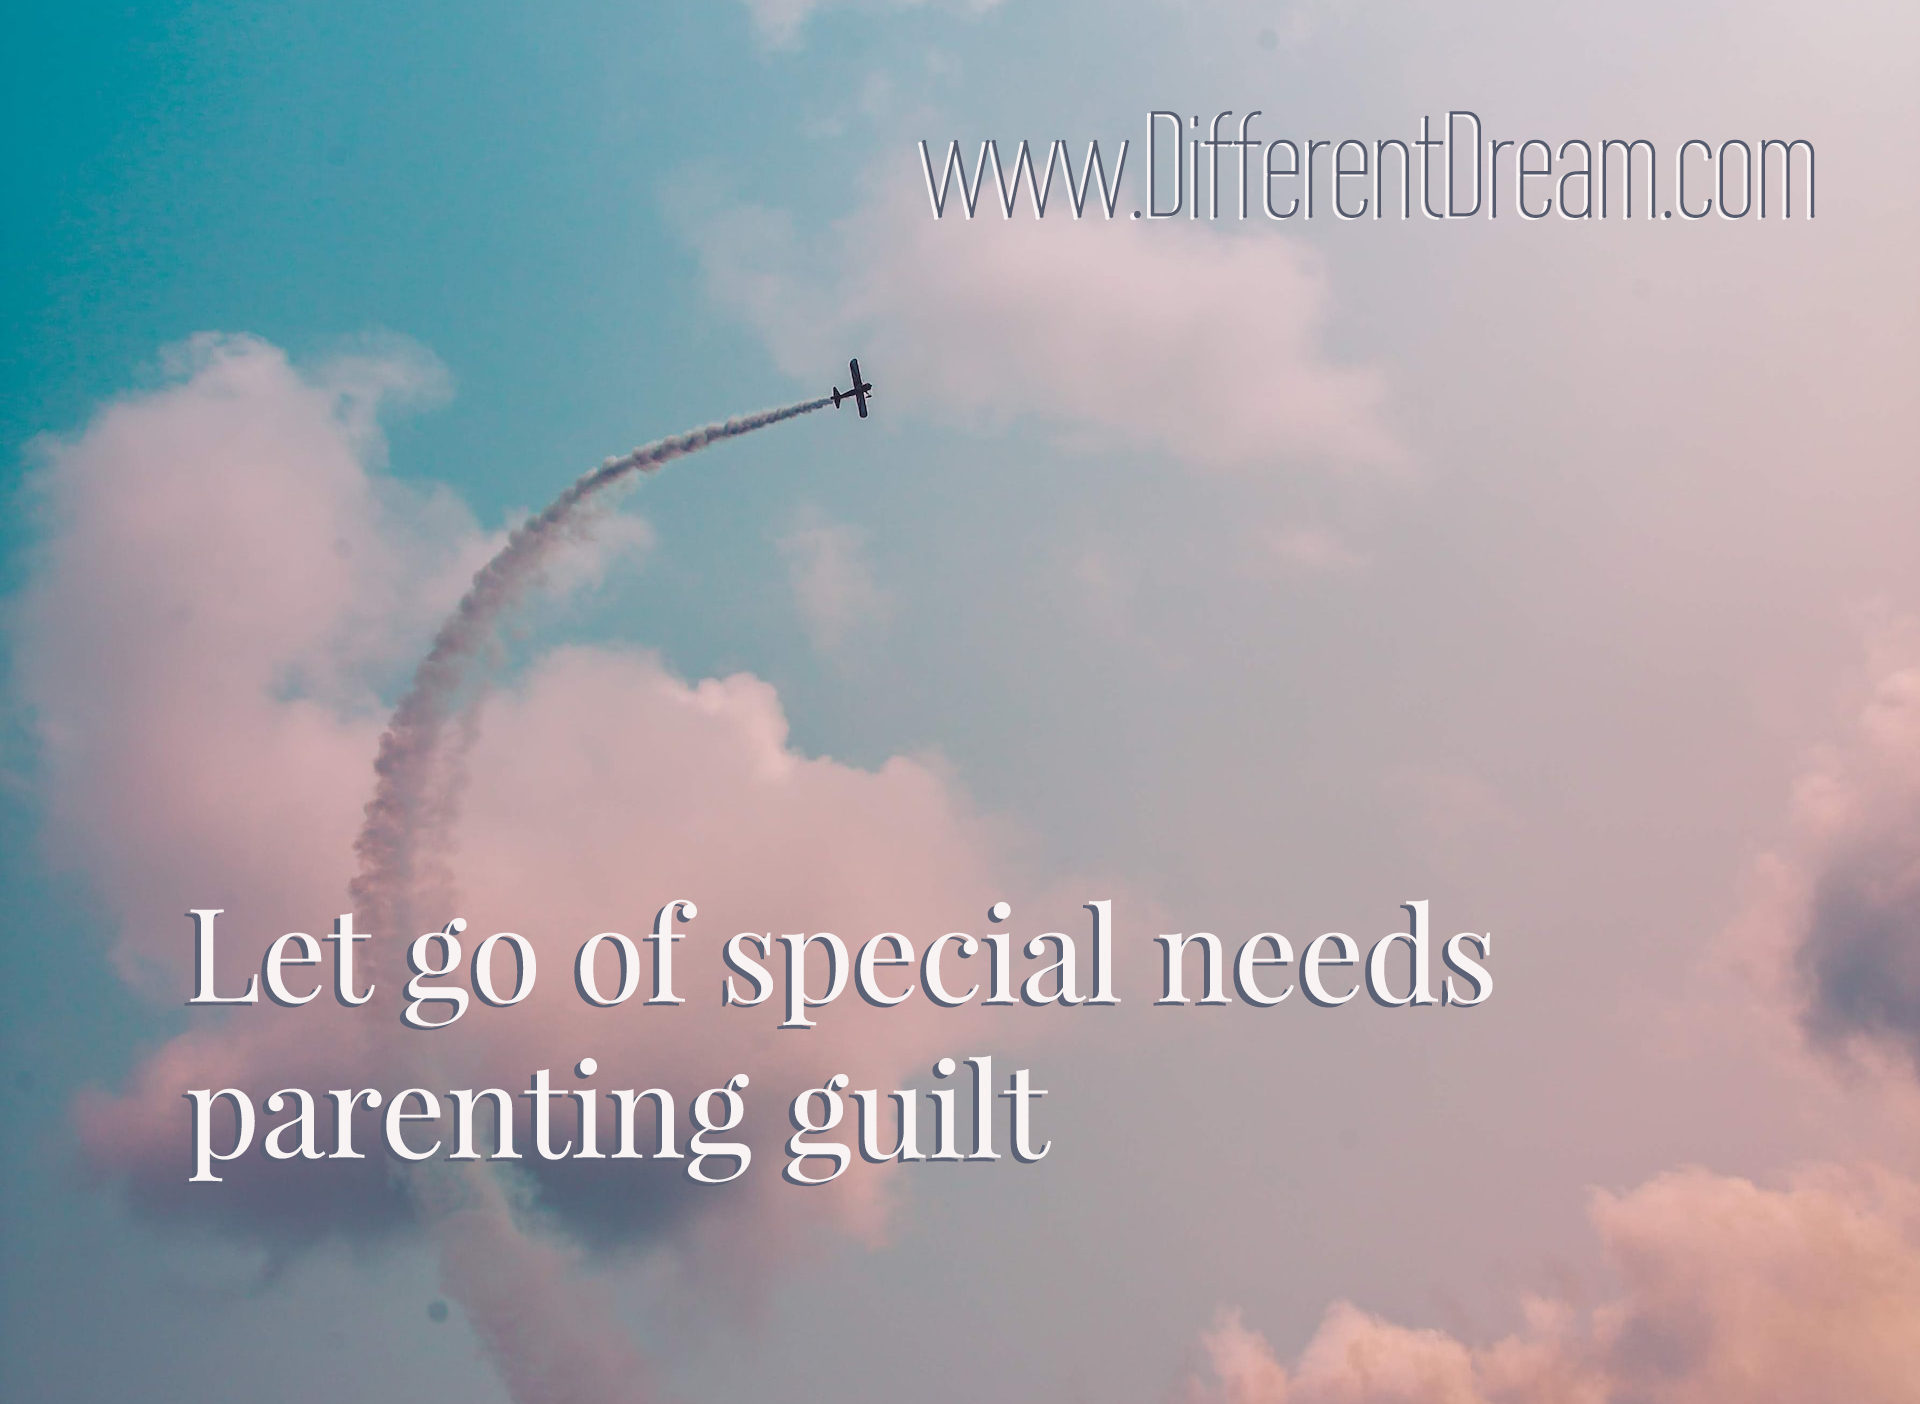 Guest blogger Lisa Brown explains how you can cope when special needs parenting guilt tries to steal your joy.